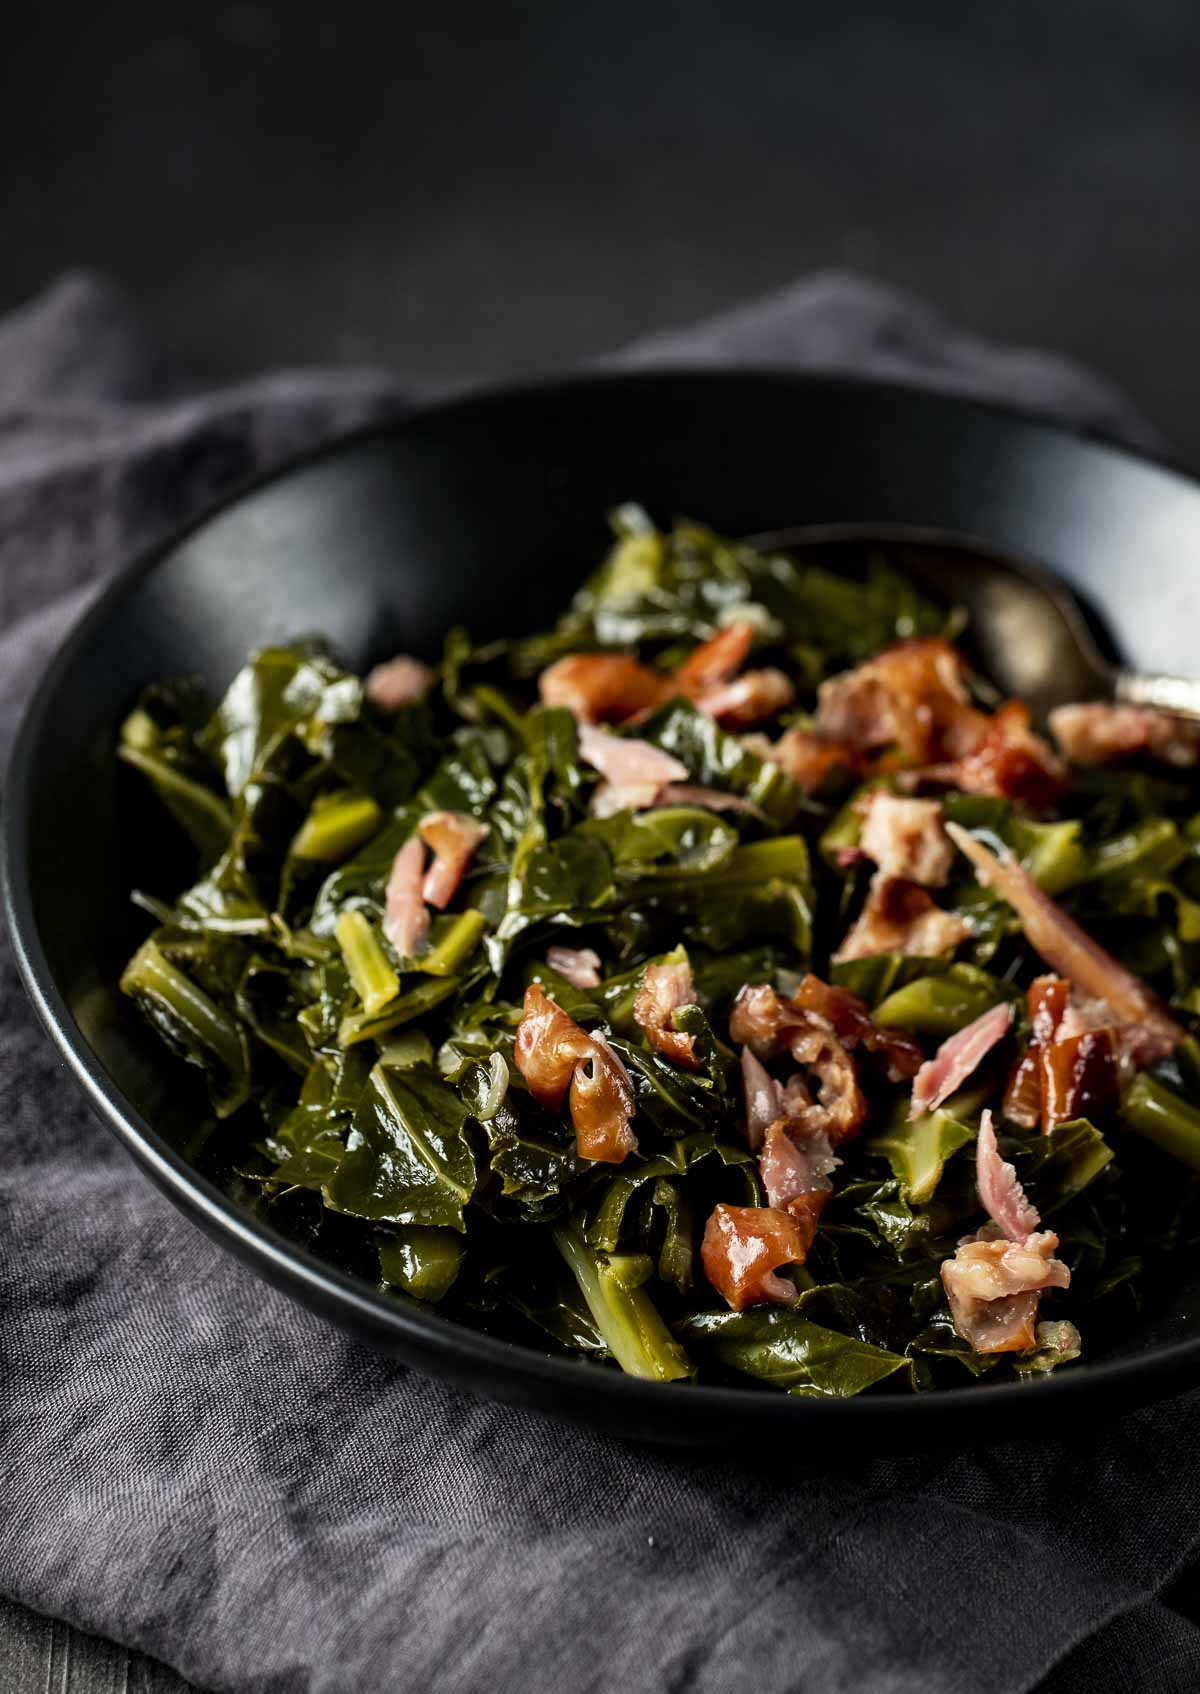 Instant Pot collard greens with shredded smoked turkey served in a black bowl.